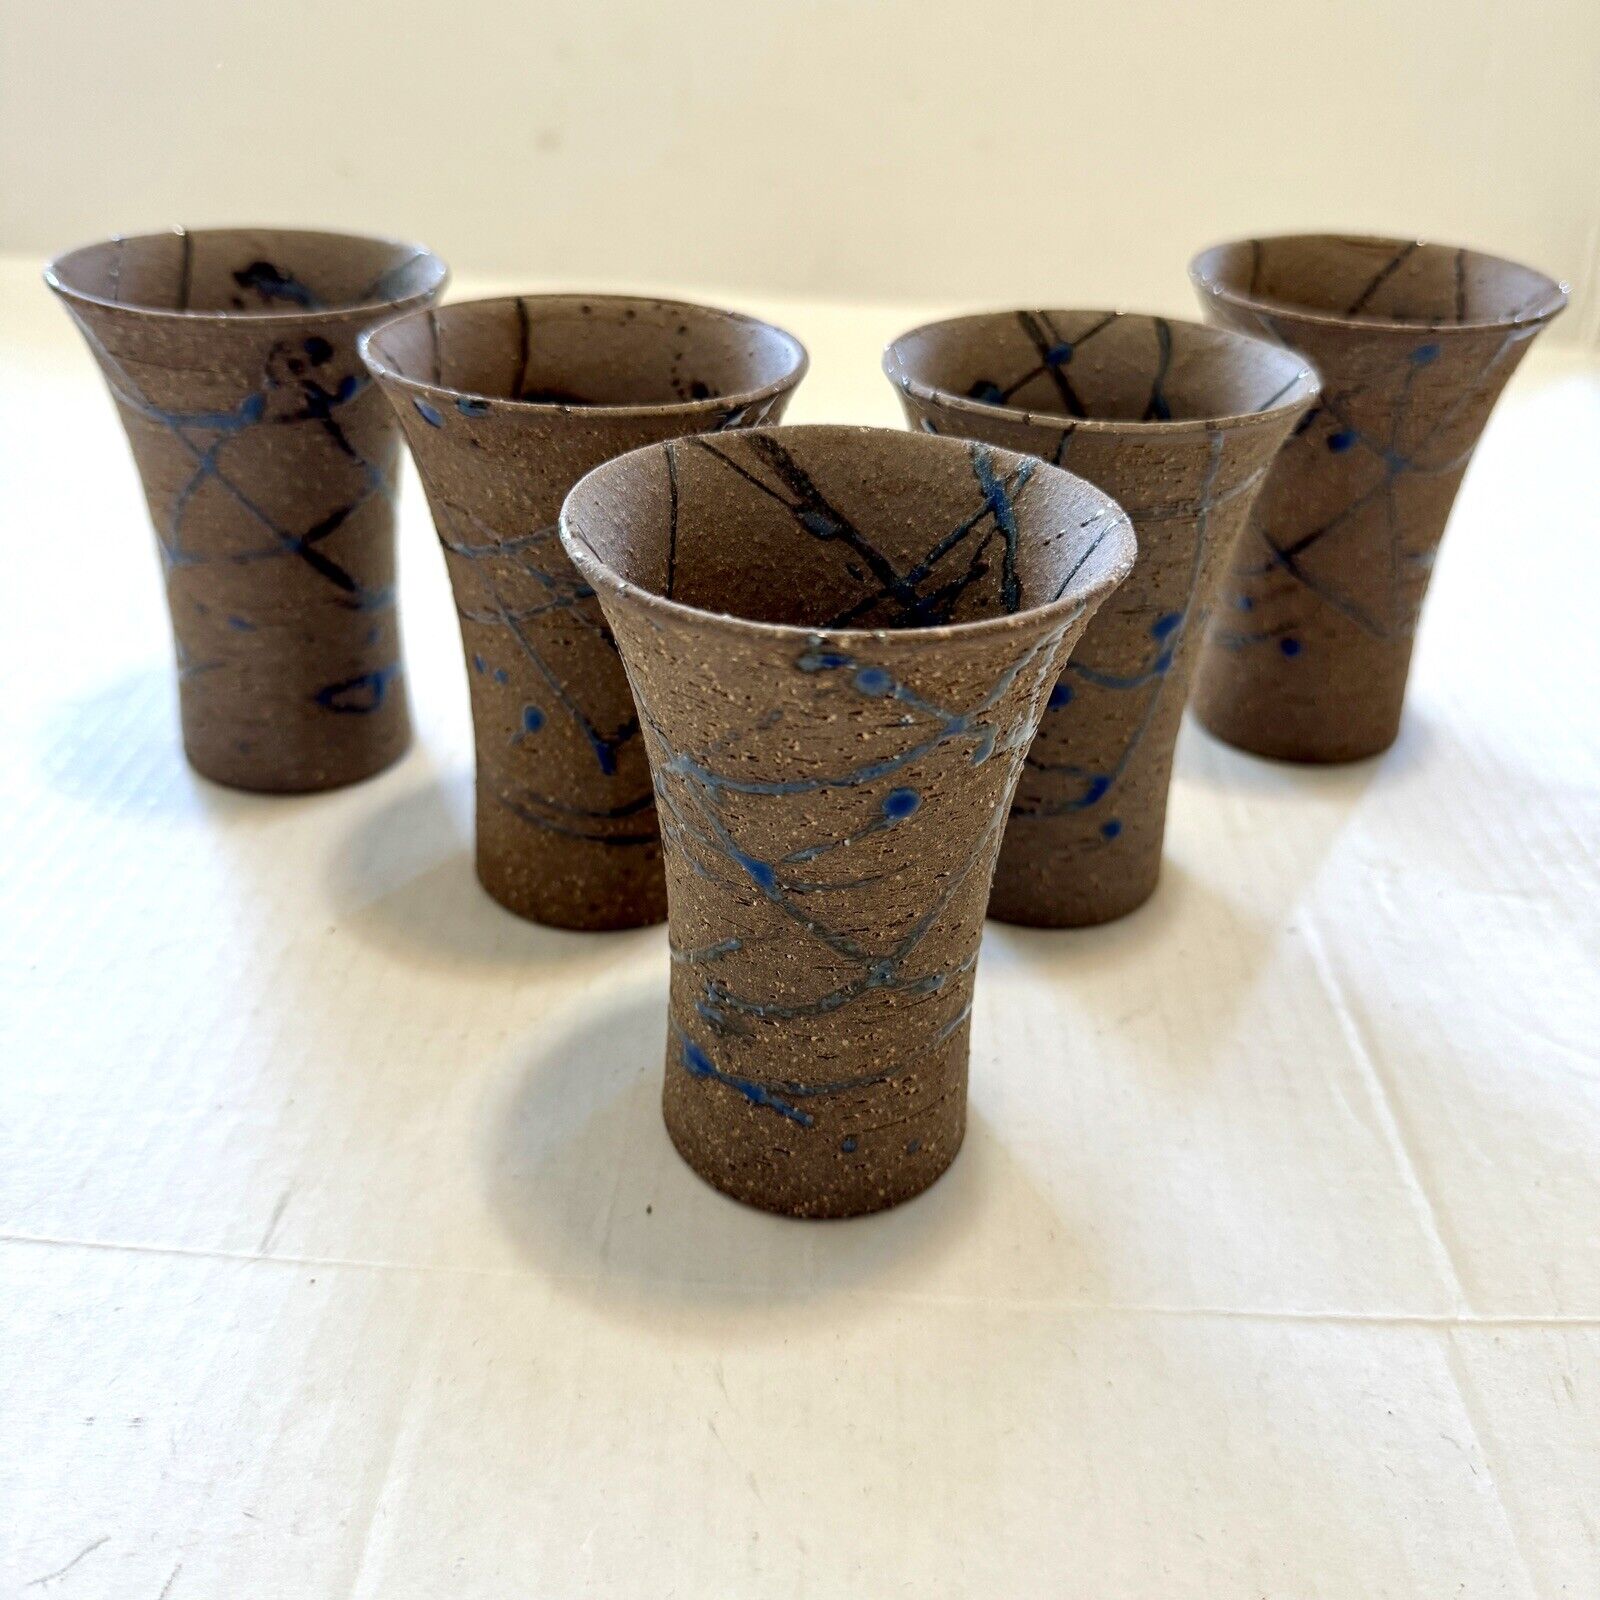 5  JAPANESE ART POTTERY BEER GLASSES - SPATTERED GLAZE ABSTRACT DESIGN Hand Made